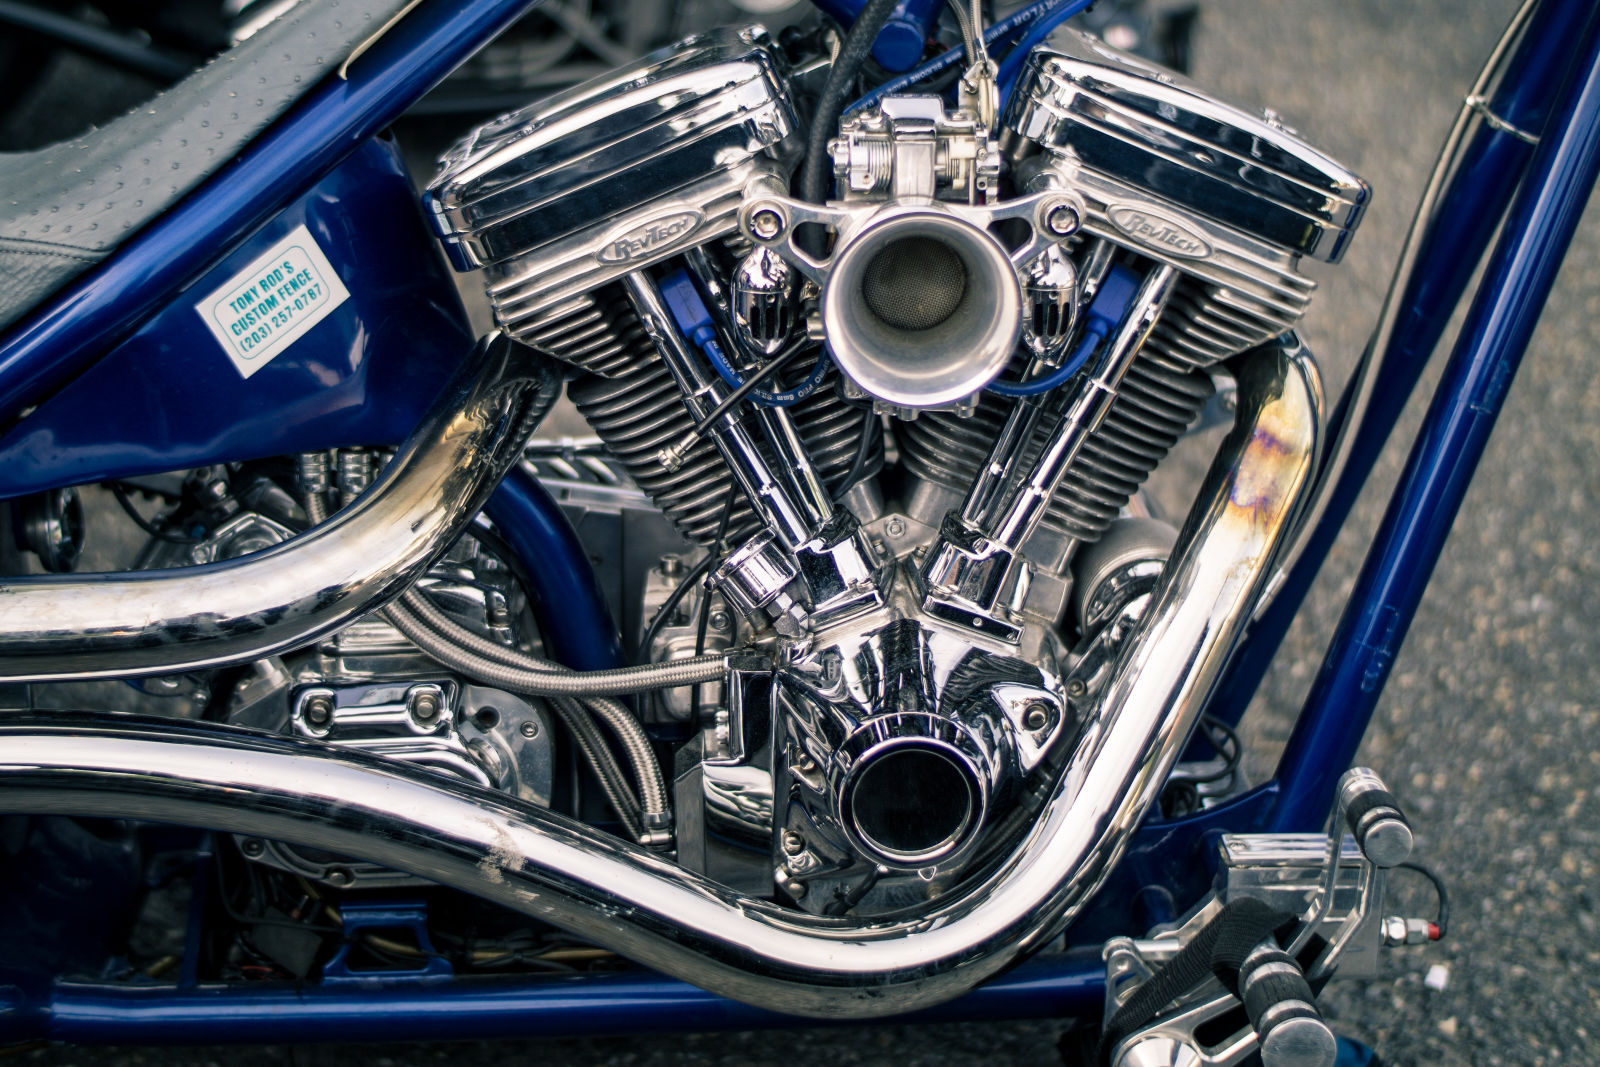 I’m not really into choppers, but I can’t pass up a big shiny motor with a smooth intake trumpet...